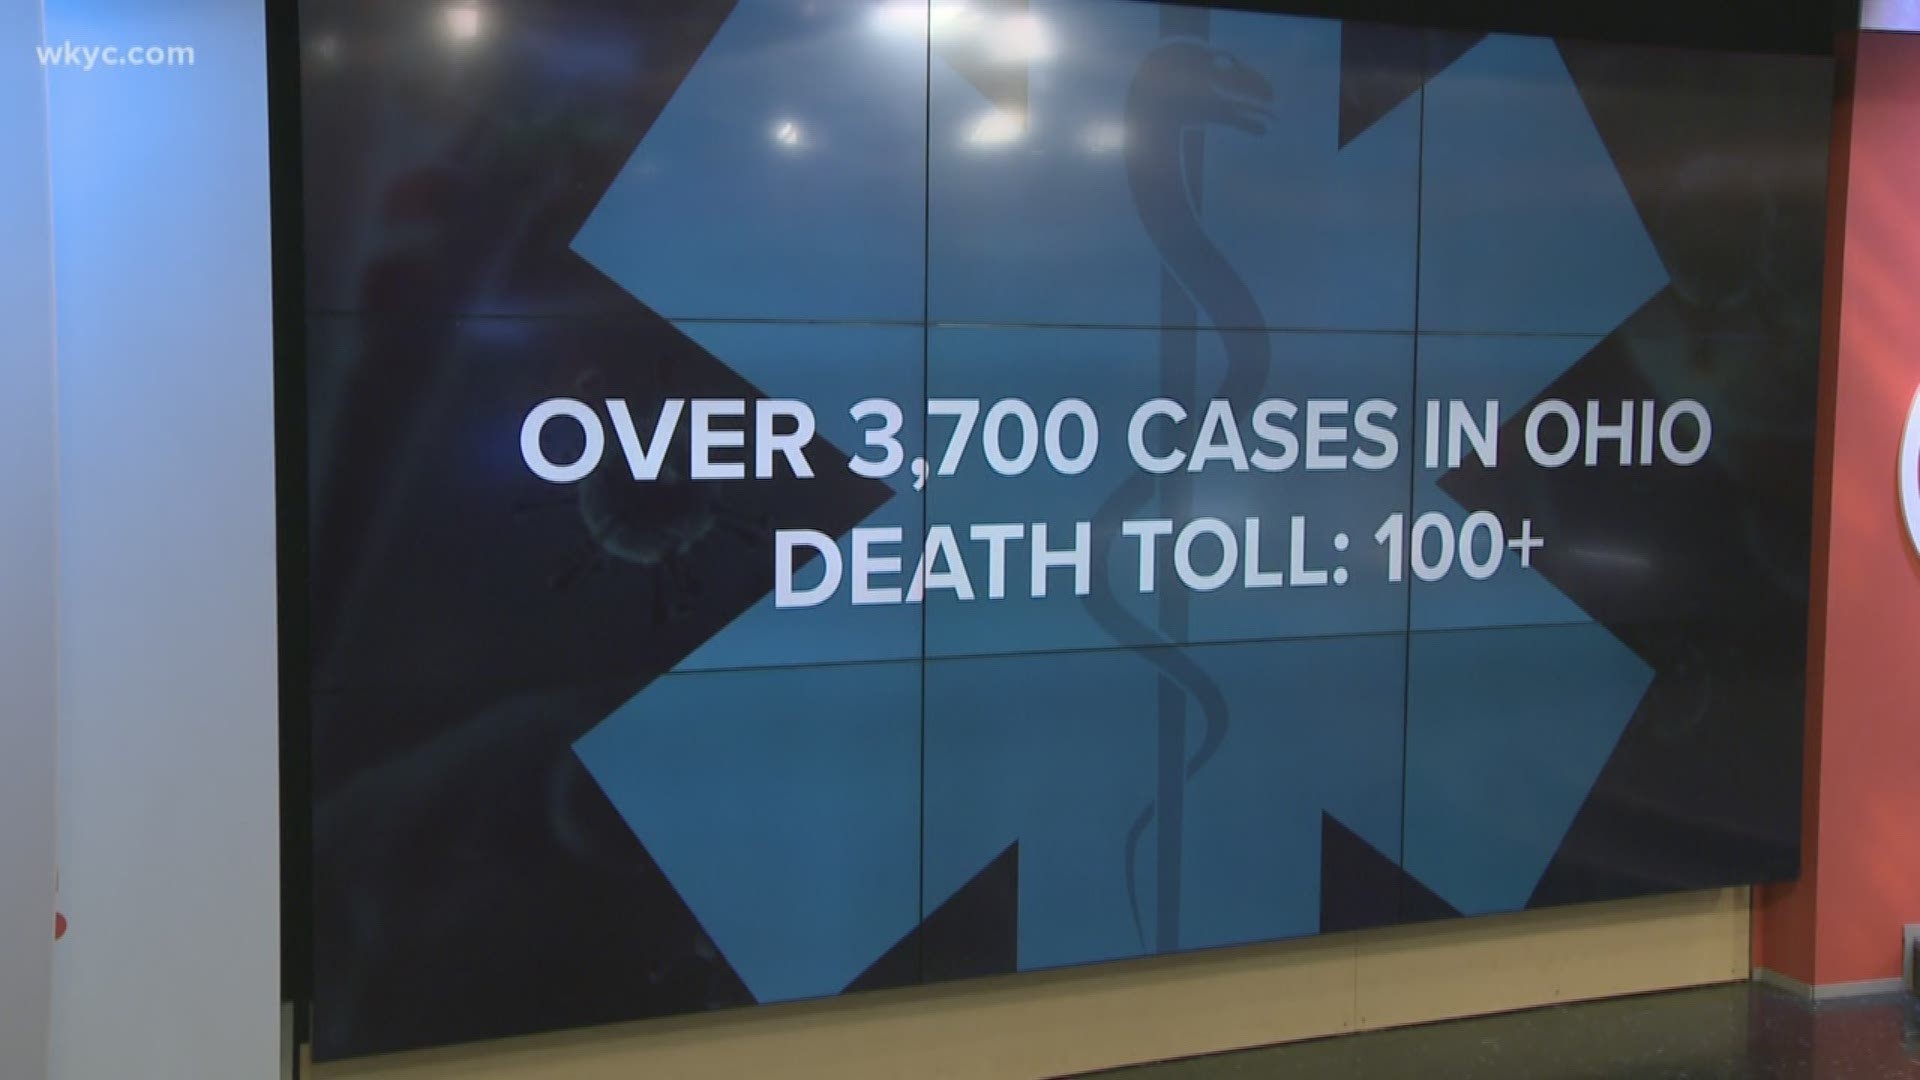 The state is reporting over 3,700 cases of COVID-19. More than 100 people have died.